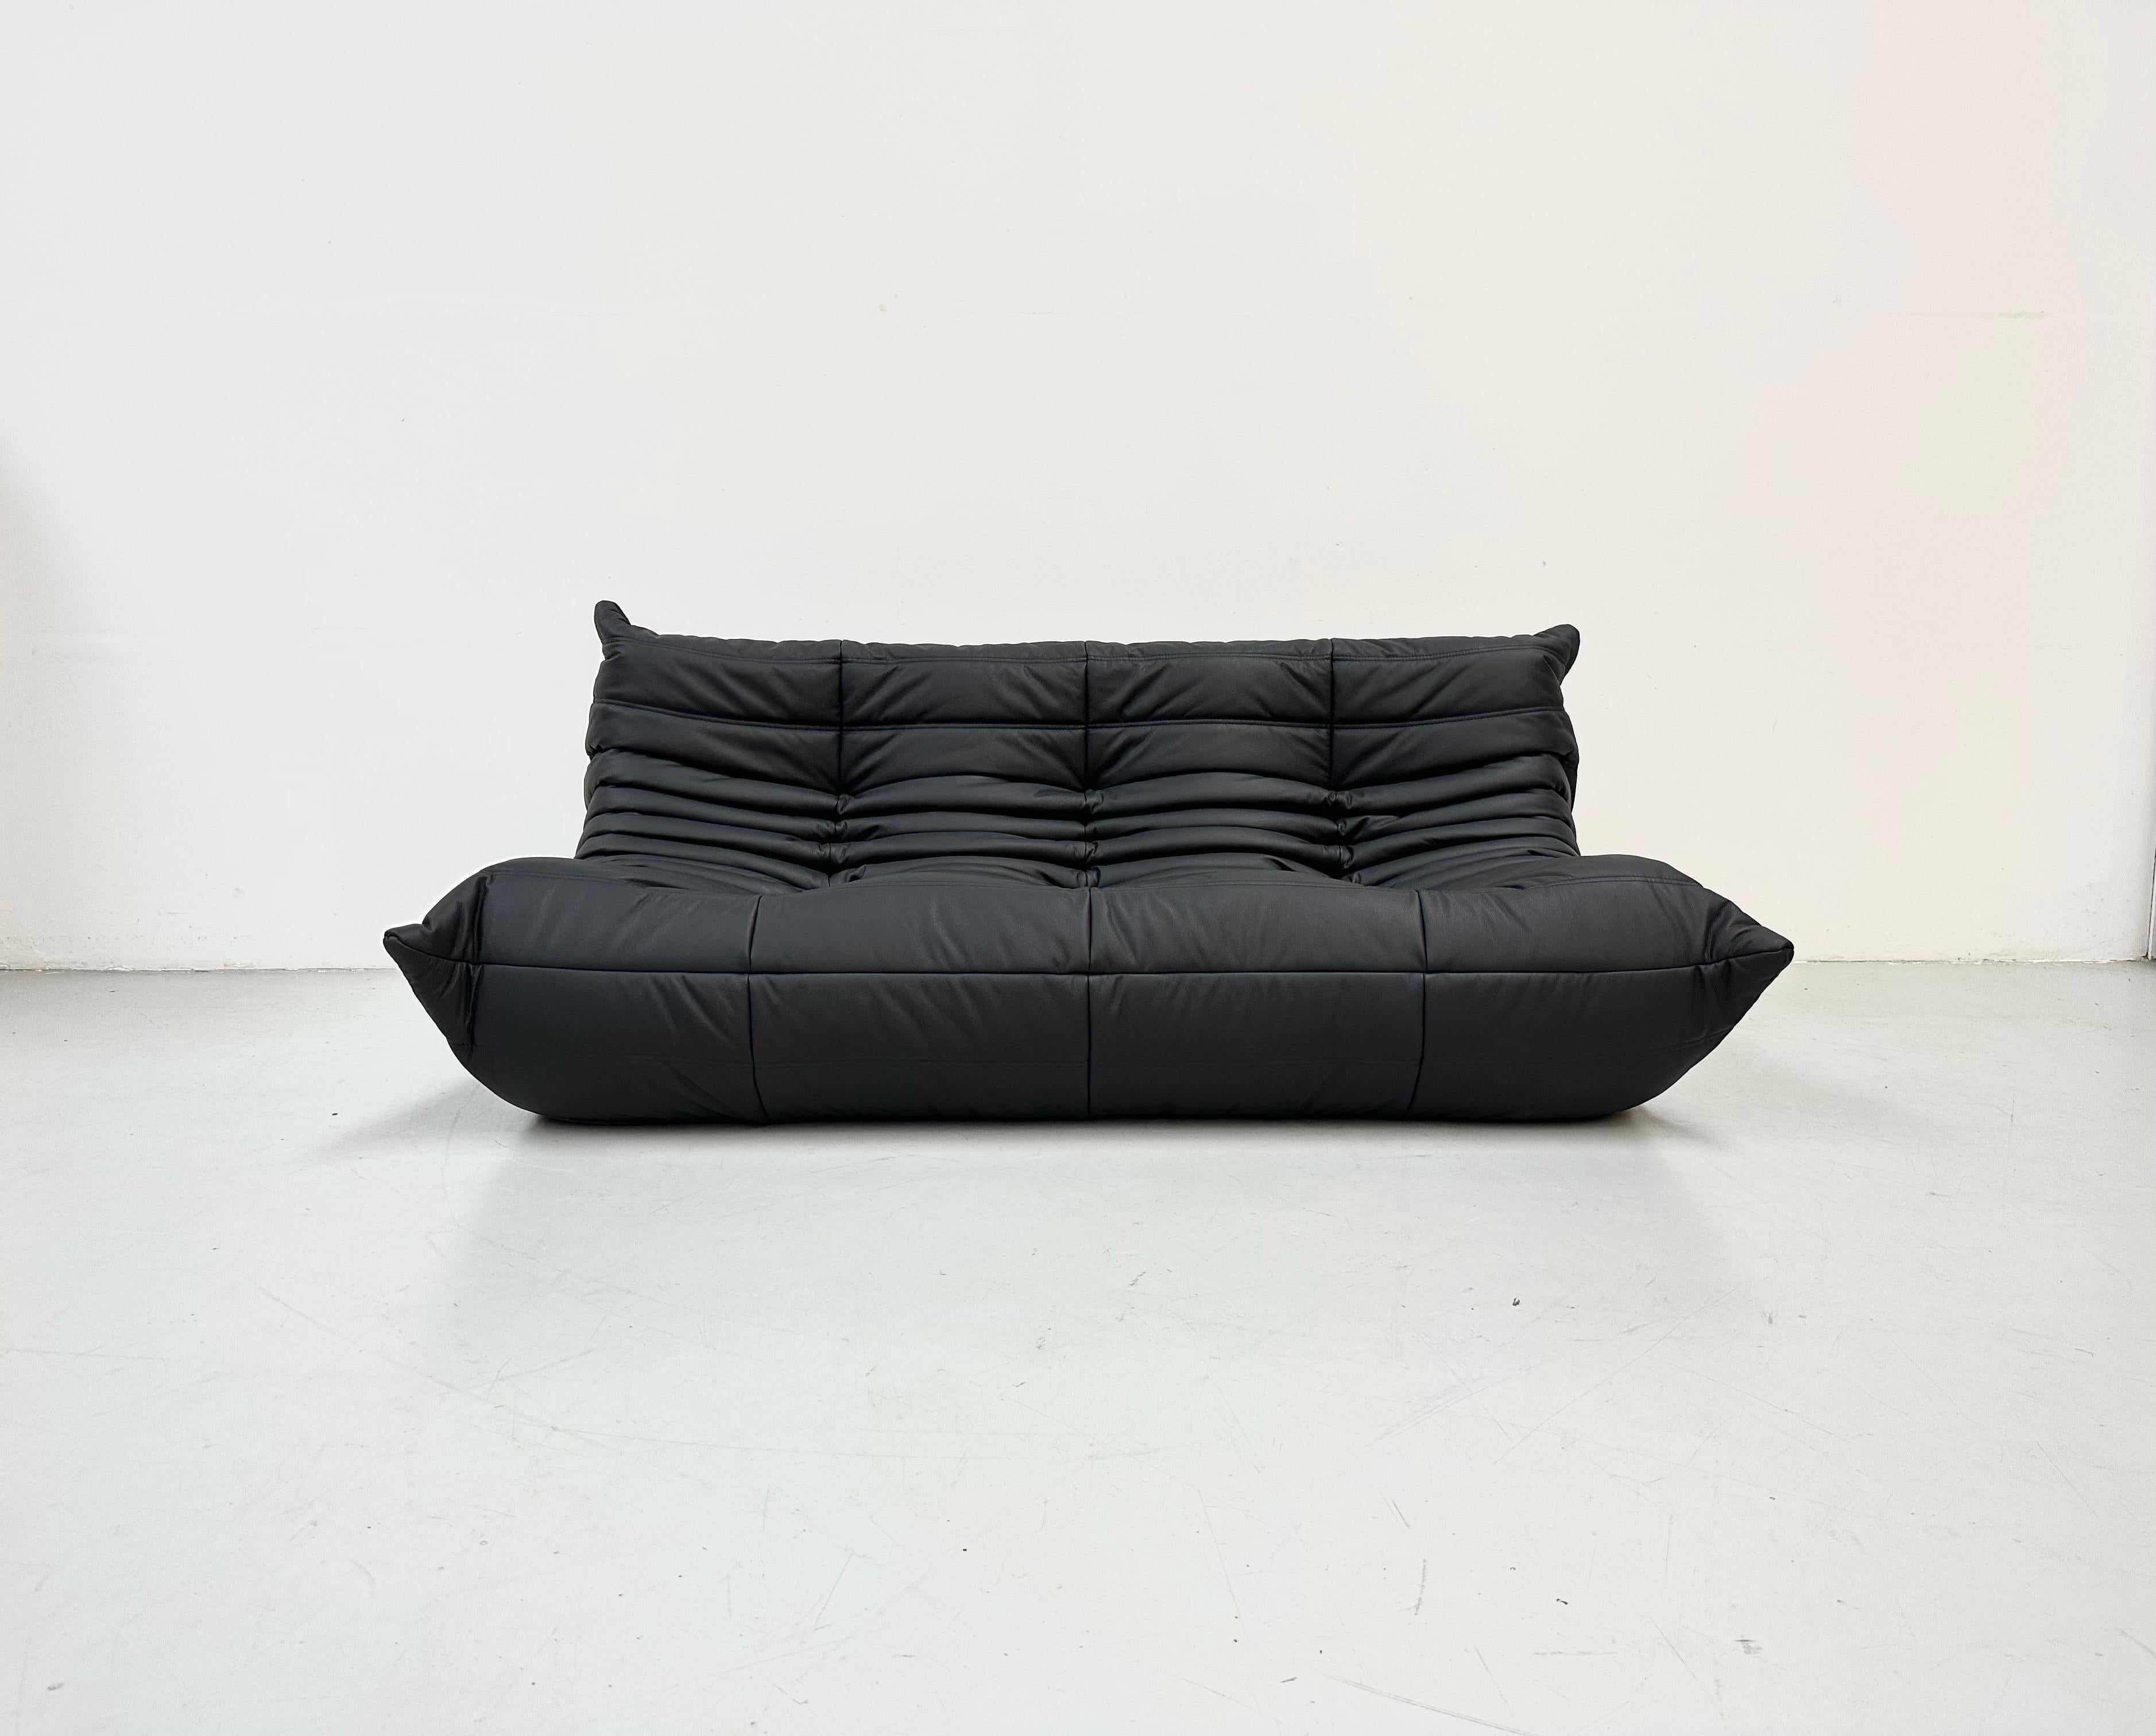 20th Century French Vintage Togo Sofa in Black Leather by Michel Ducaroy for Ligne Roset. For Sale